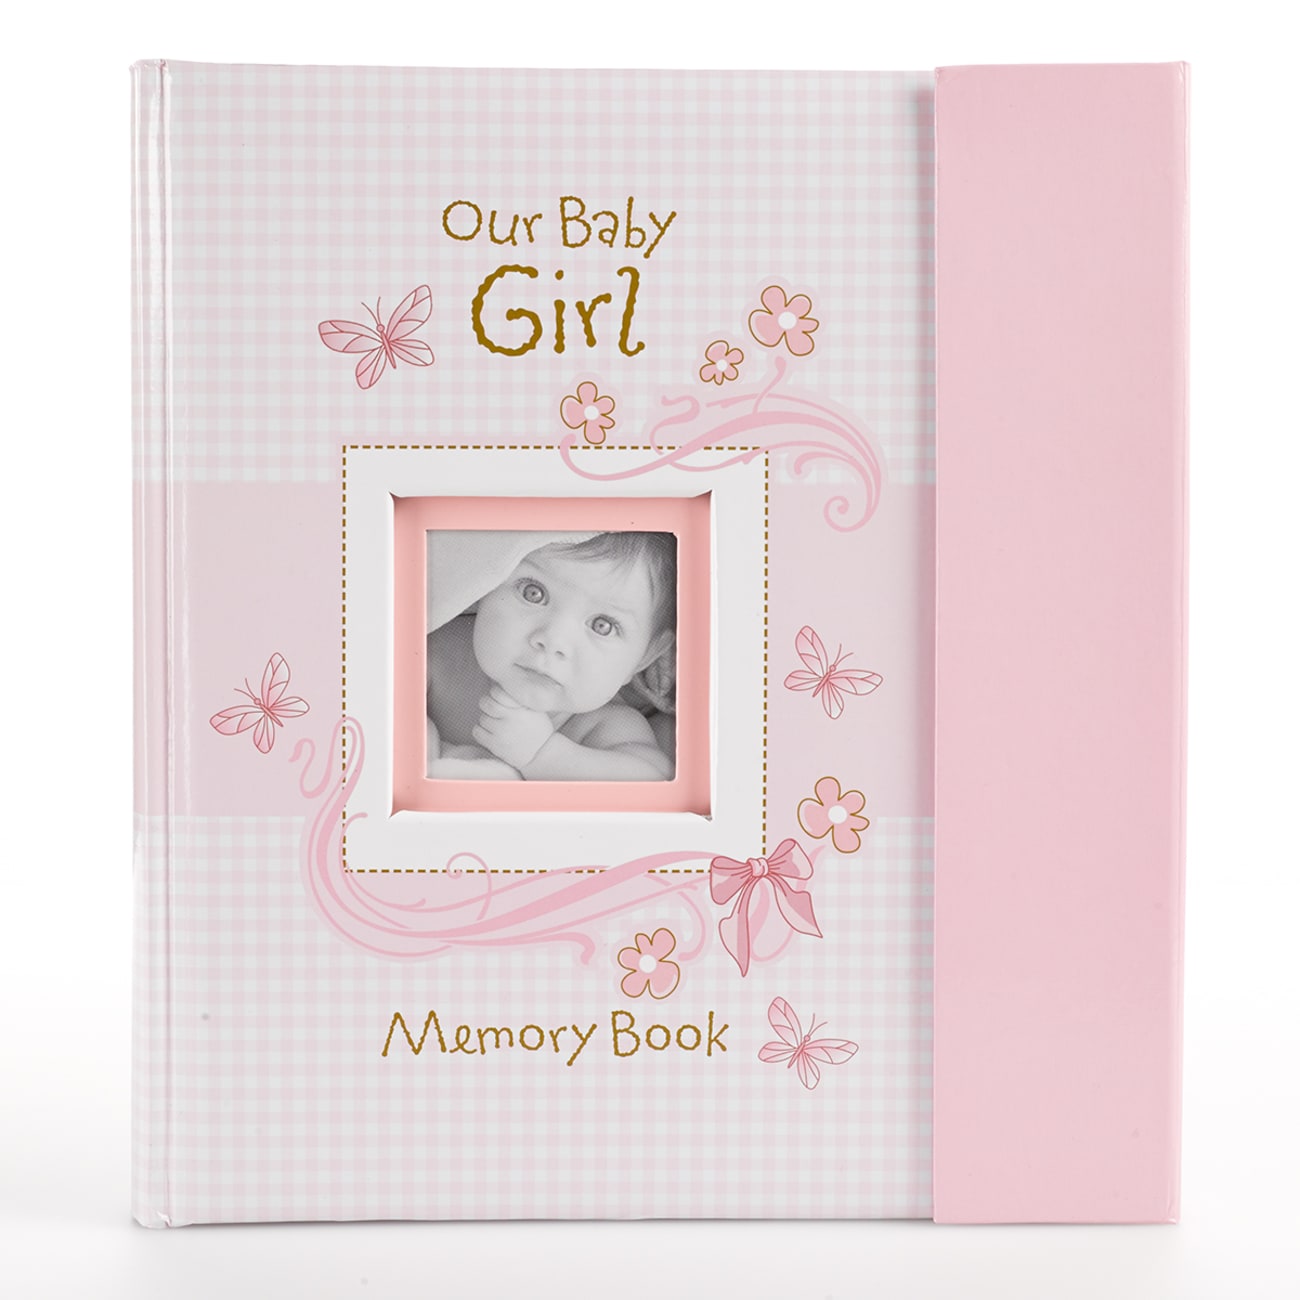 Our Baby Girl Memory Book Gift Boxed Hardback